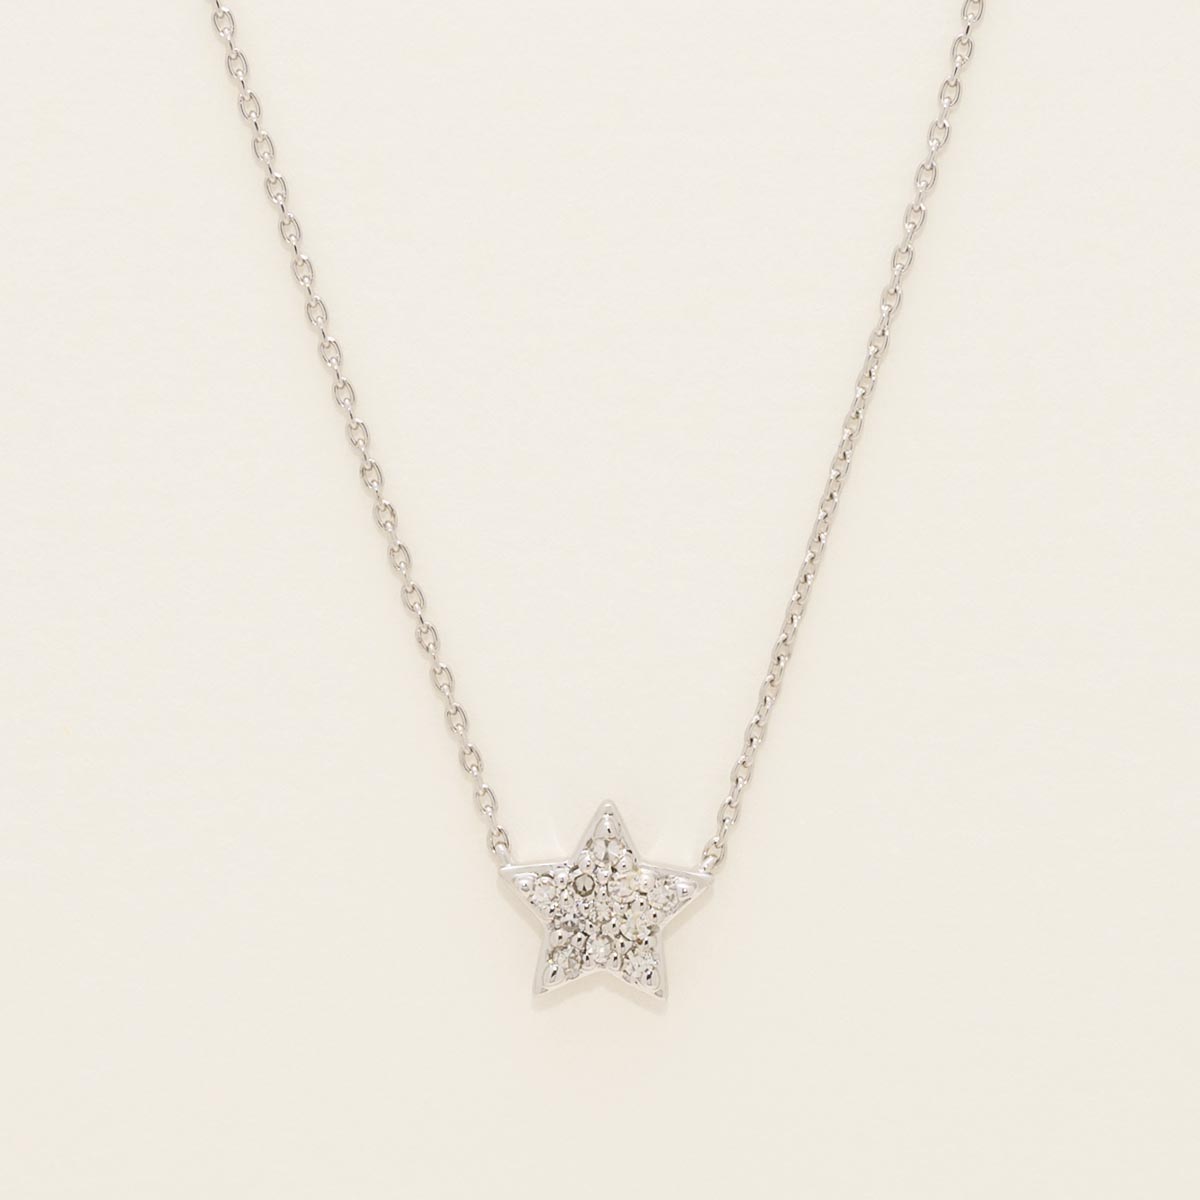 Diamond Star Petite Fashion Necklace in 10kt White Gold (1/10ct tw)